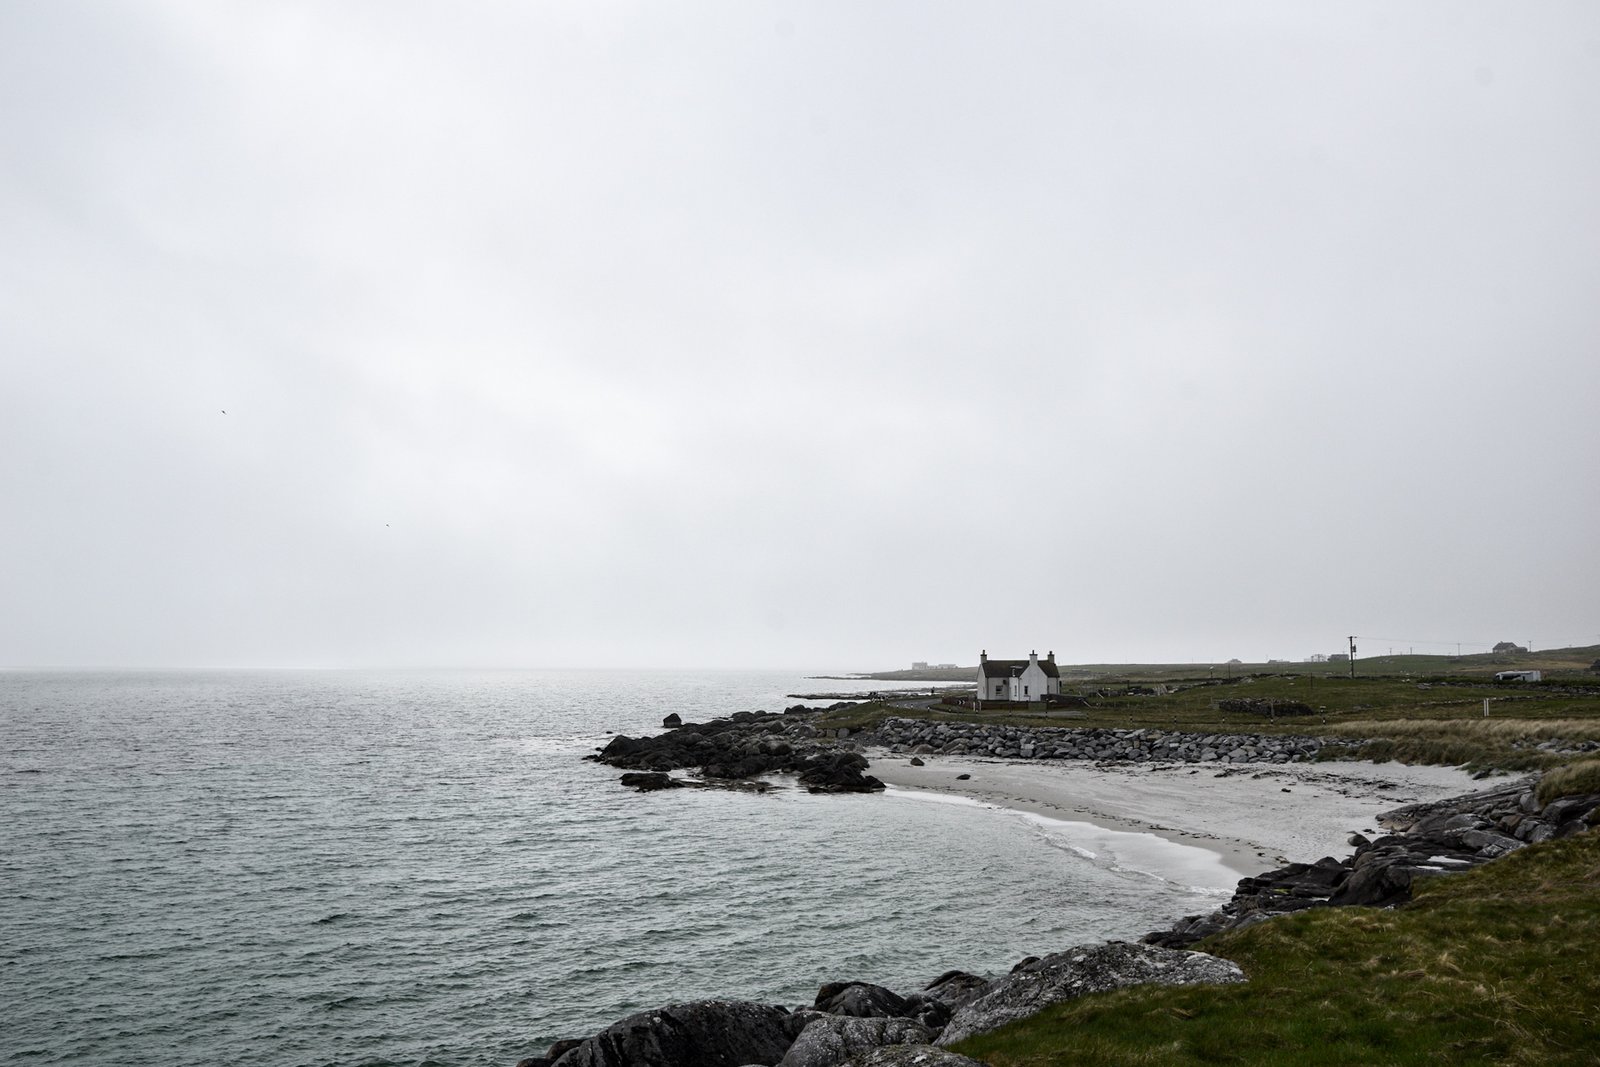 fog obscures the horizon behind a small cove